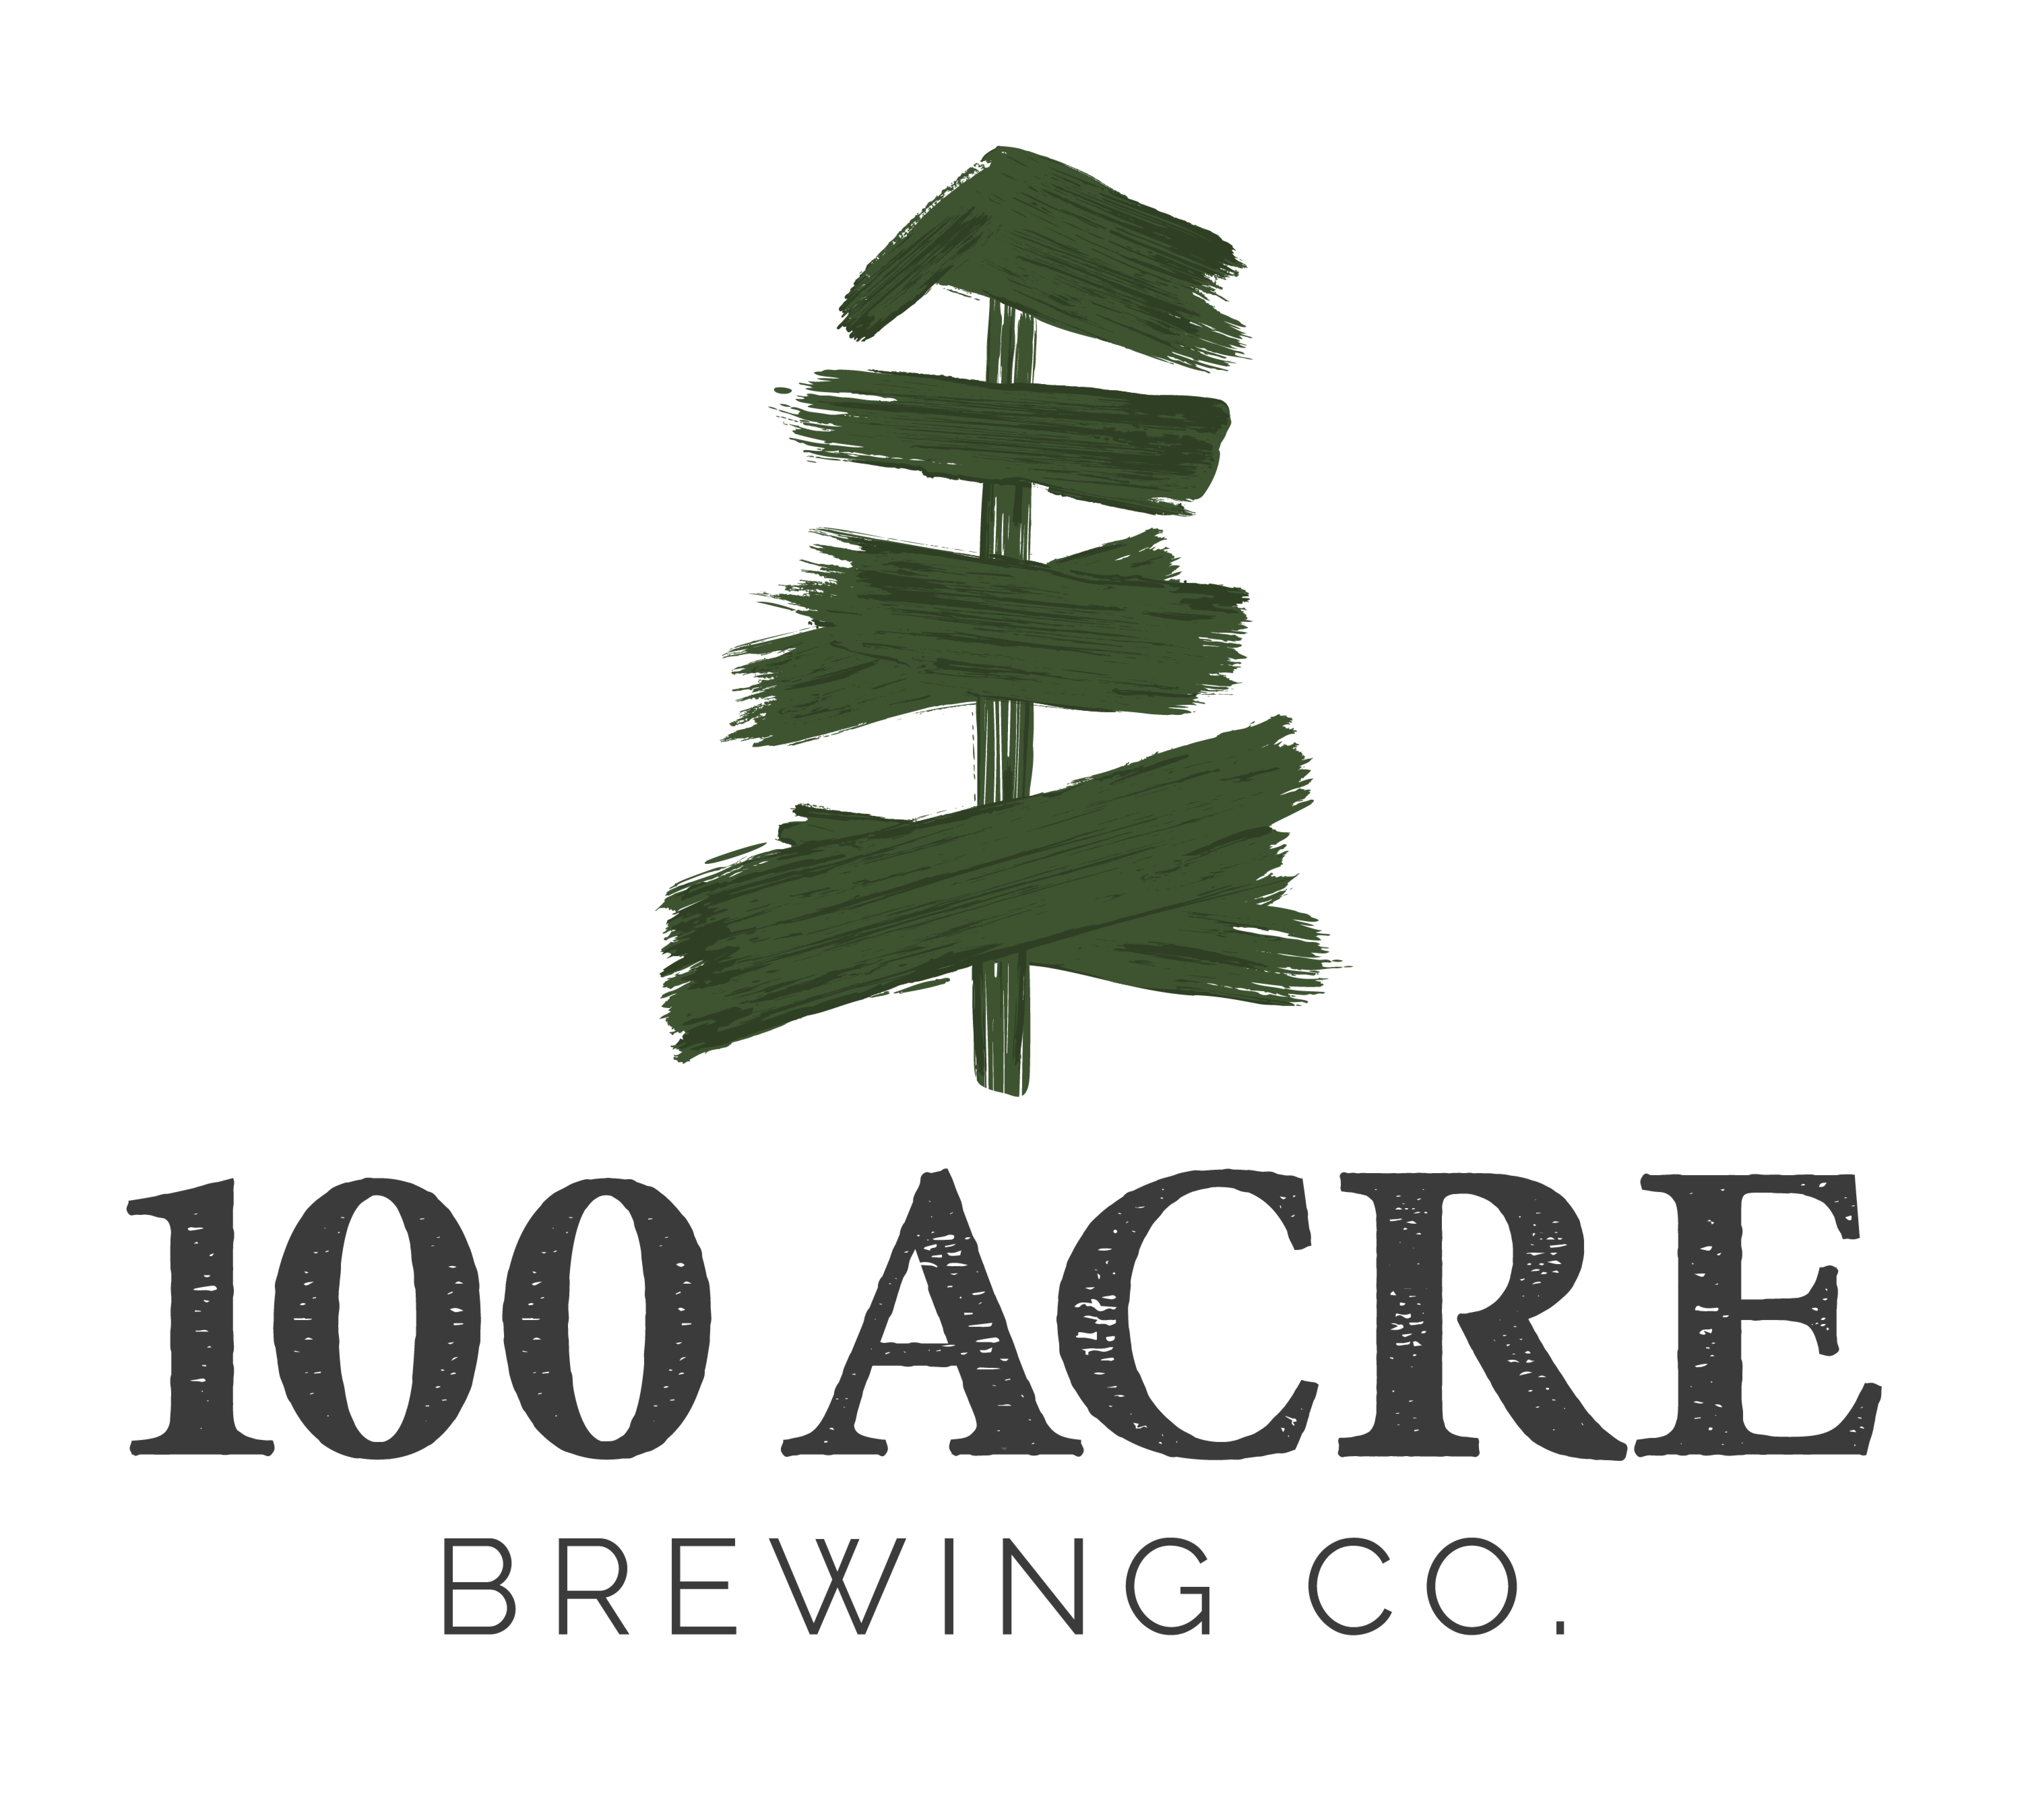 100 Acre Brewing Co.